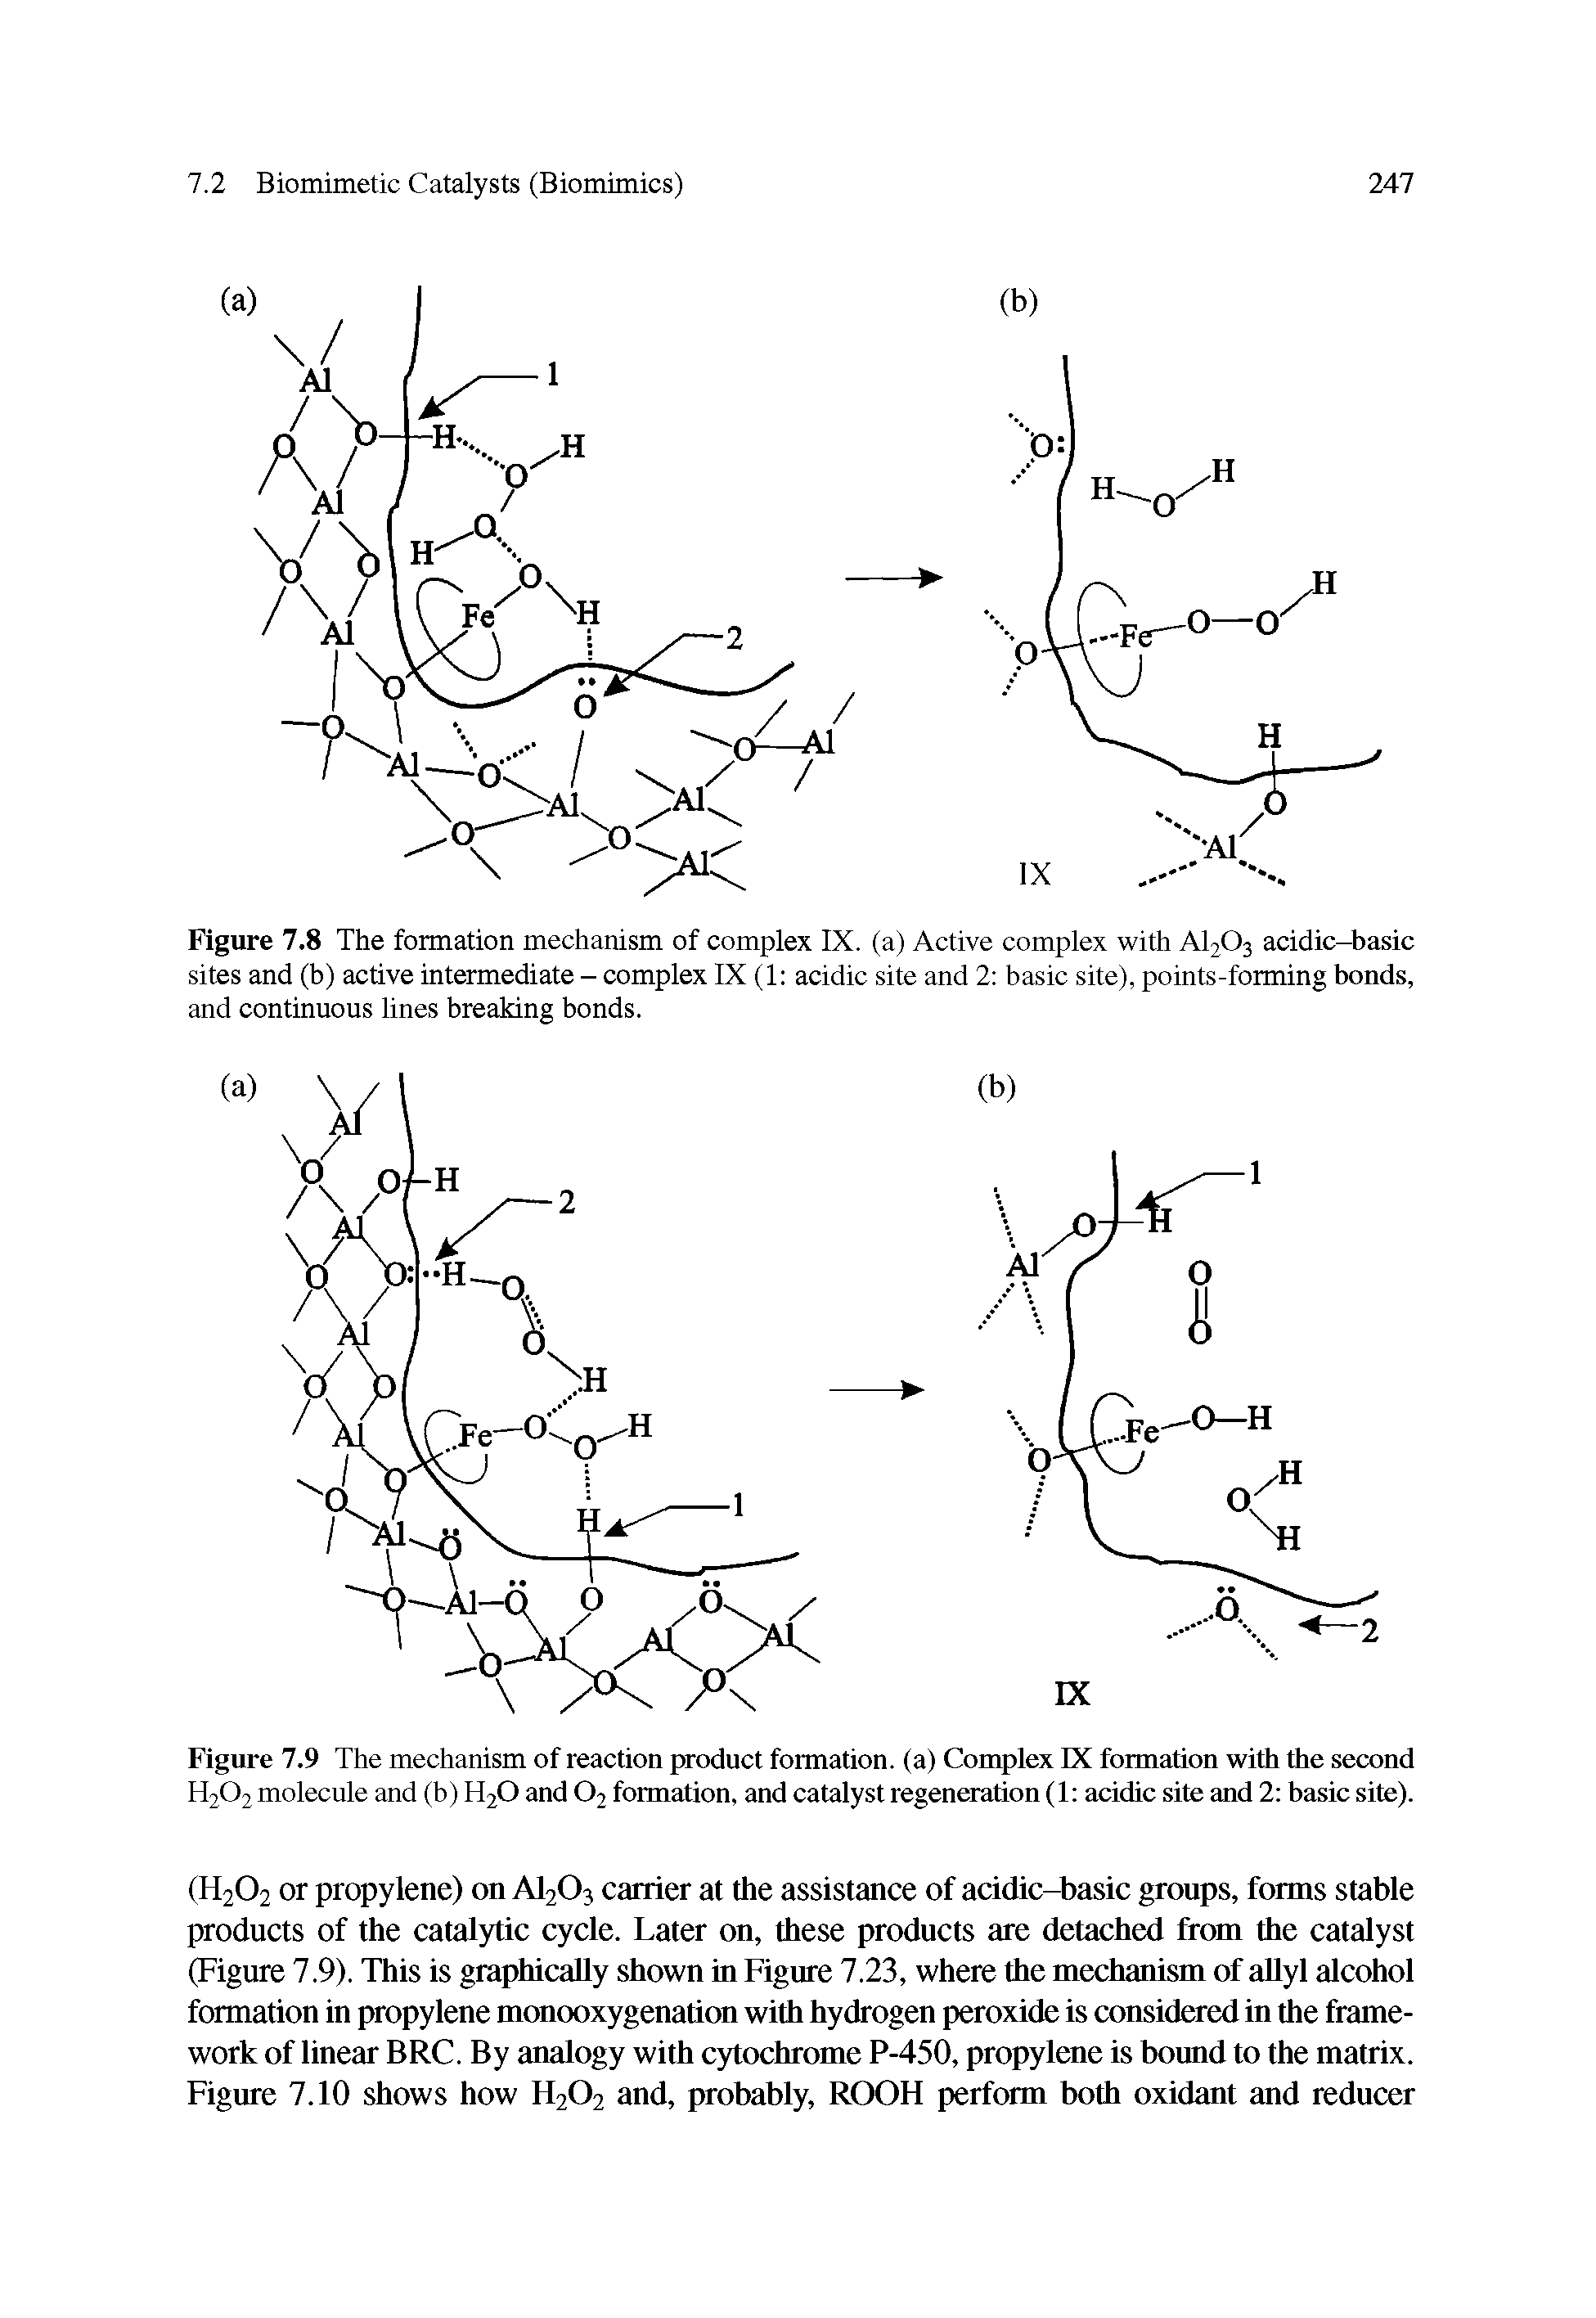 Figure 7.8 The formation mechanism of complex IX. (a) Active complex with A1203 acidic-basic sites and (b) active intermediate - complex IX (1 acidic site and 2 basic site), points-forming bonds, and continuous lines breaking bonds.